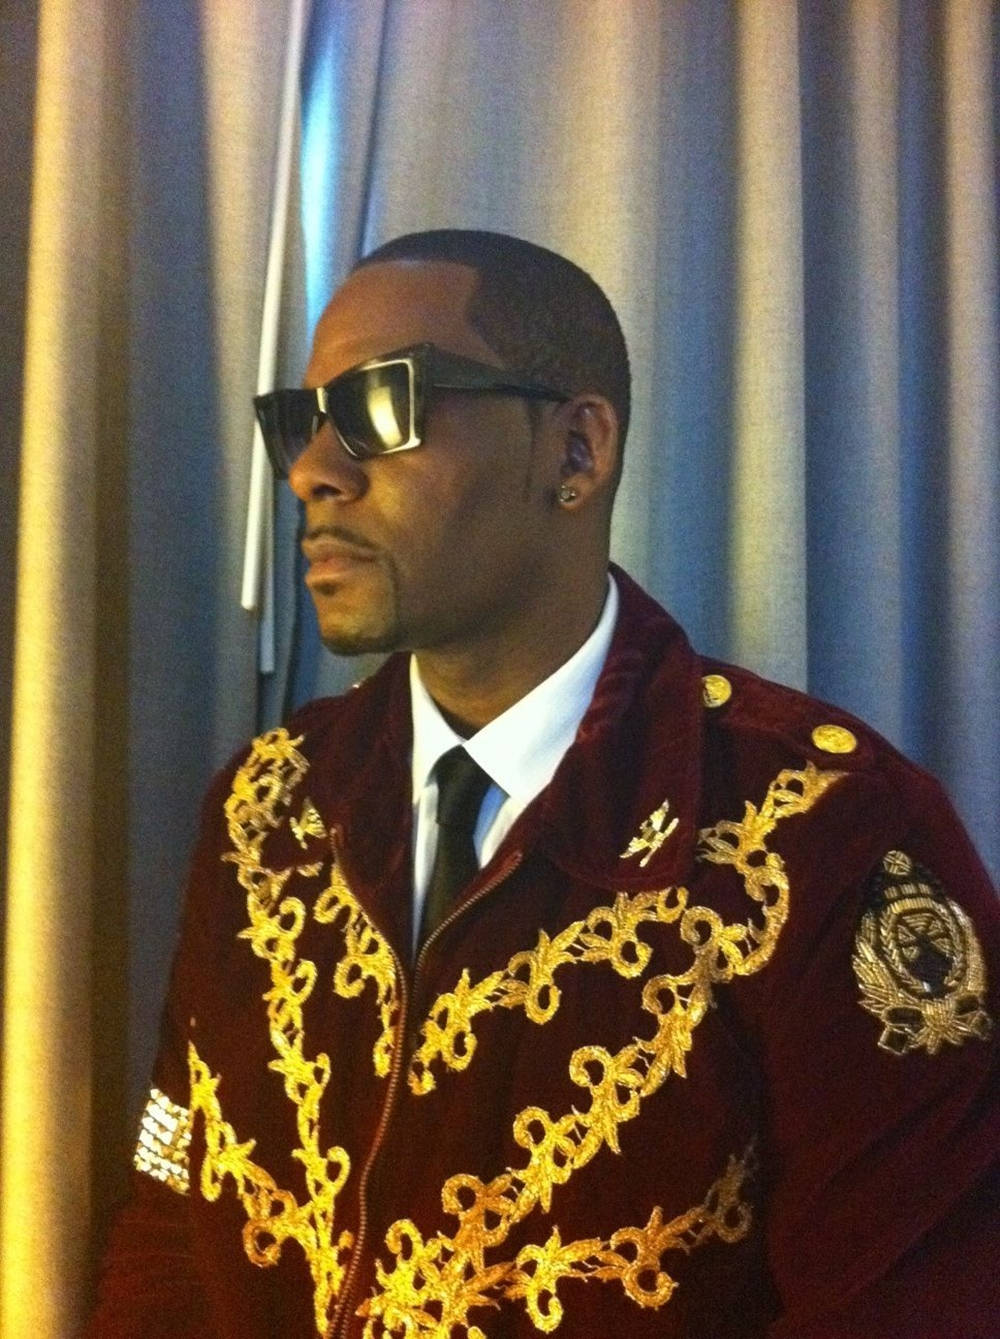 Singer R Kelly In Concert Outfit Background